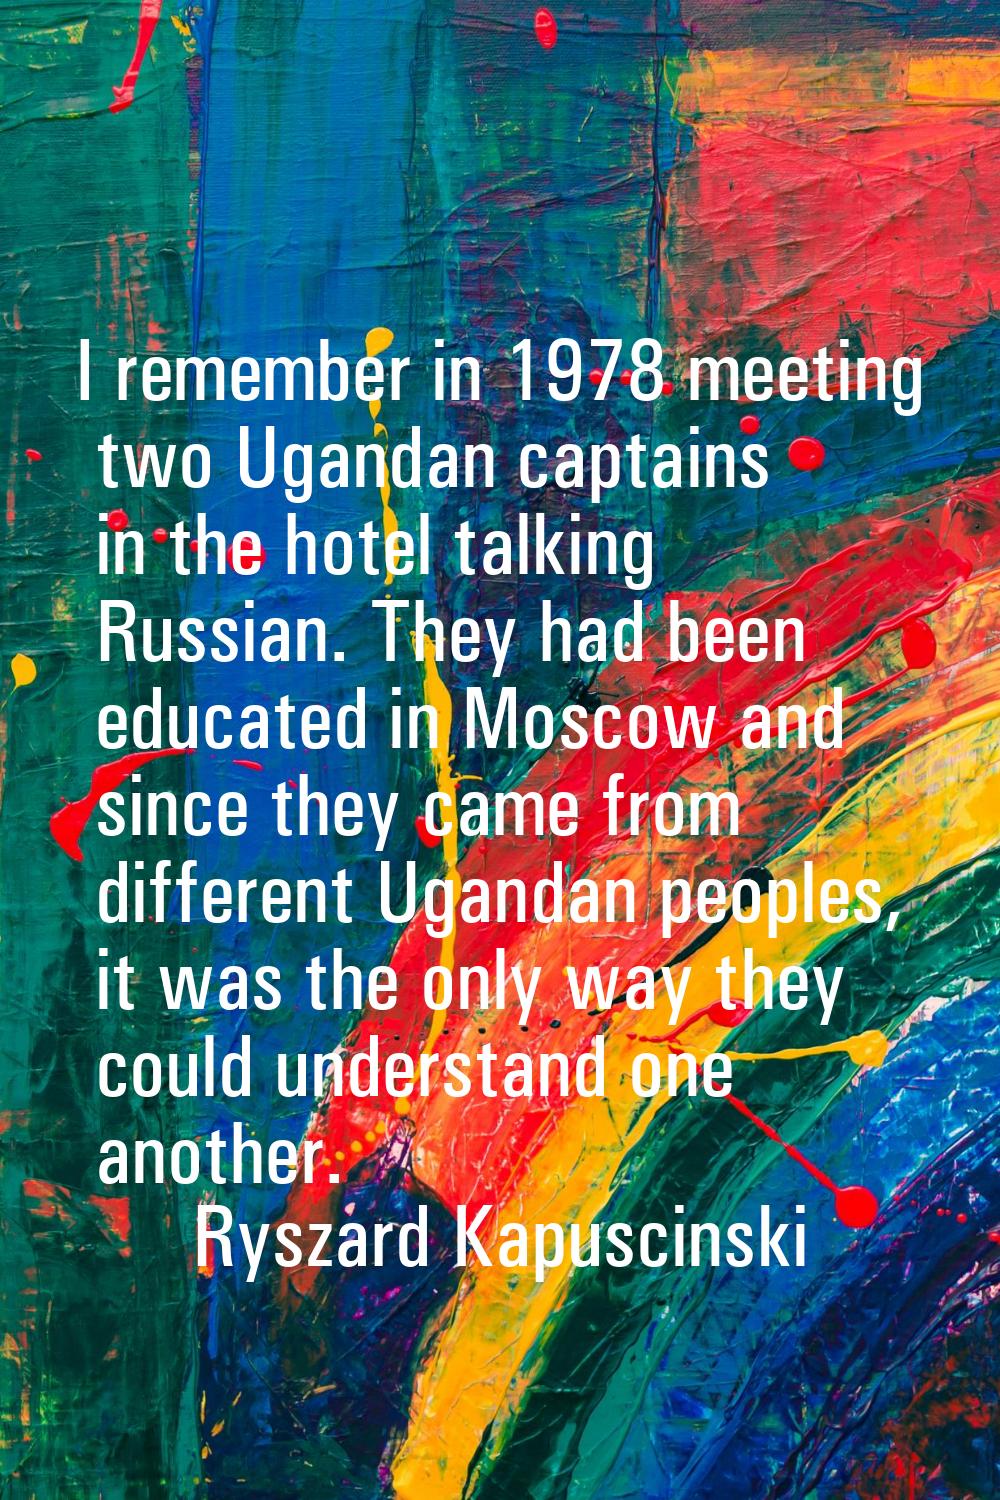 I remember in 1978 meeting two Ugandan captains in the hotel talking Russian. They had been educate